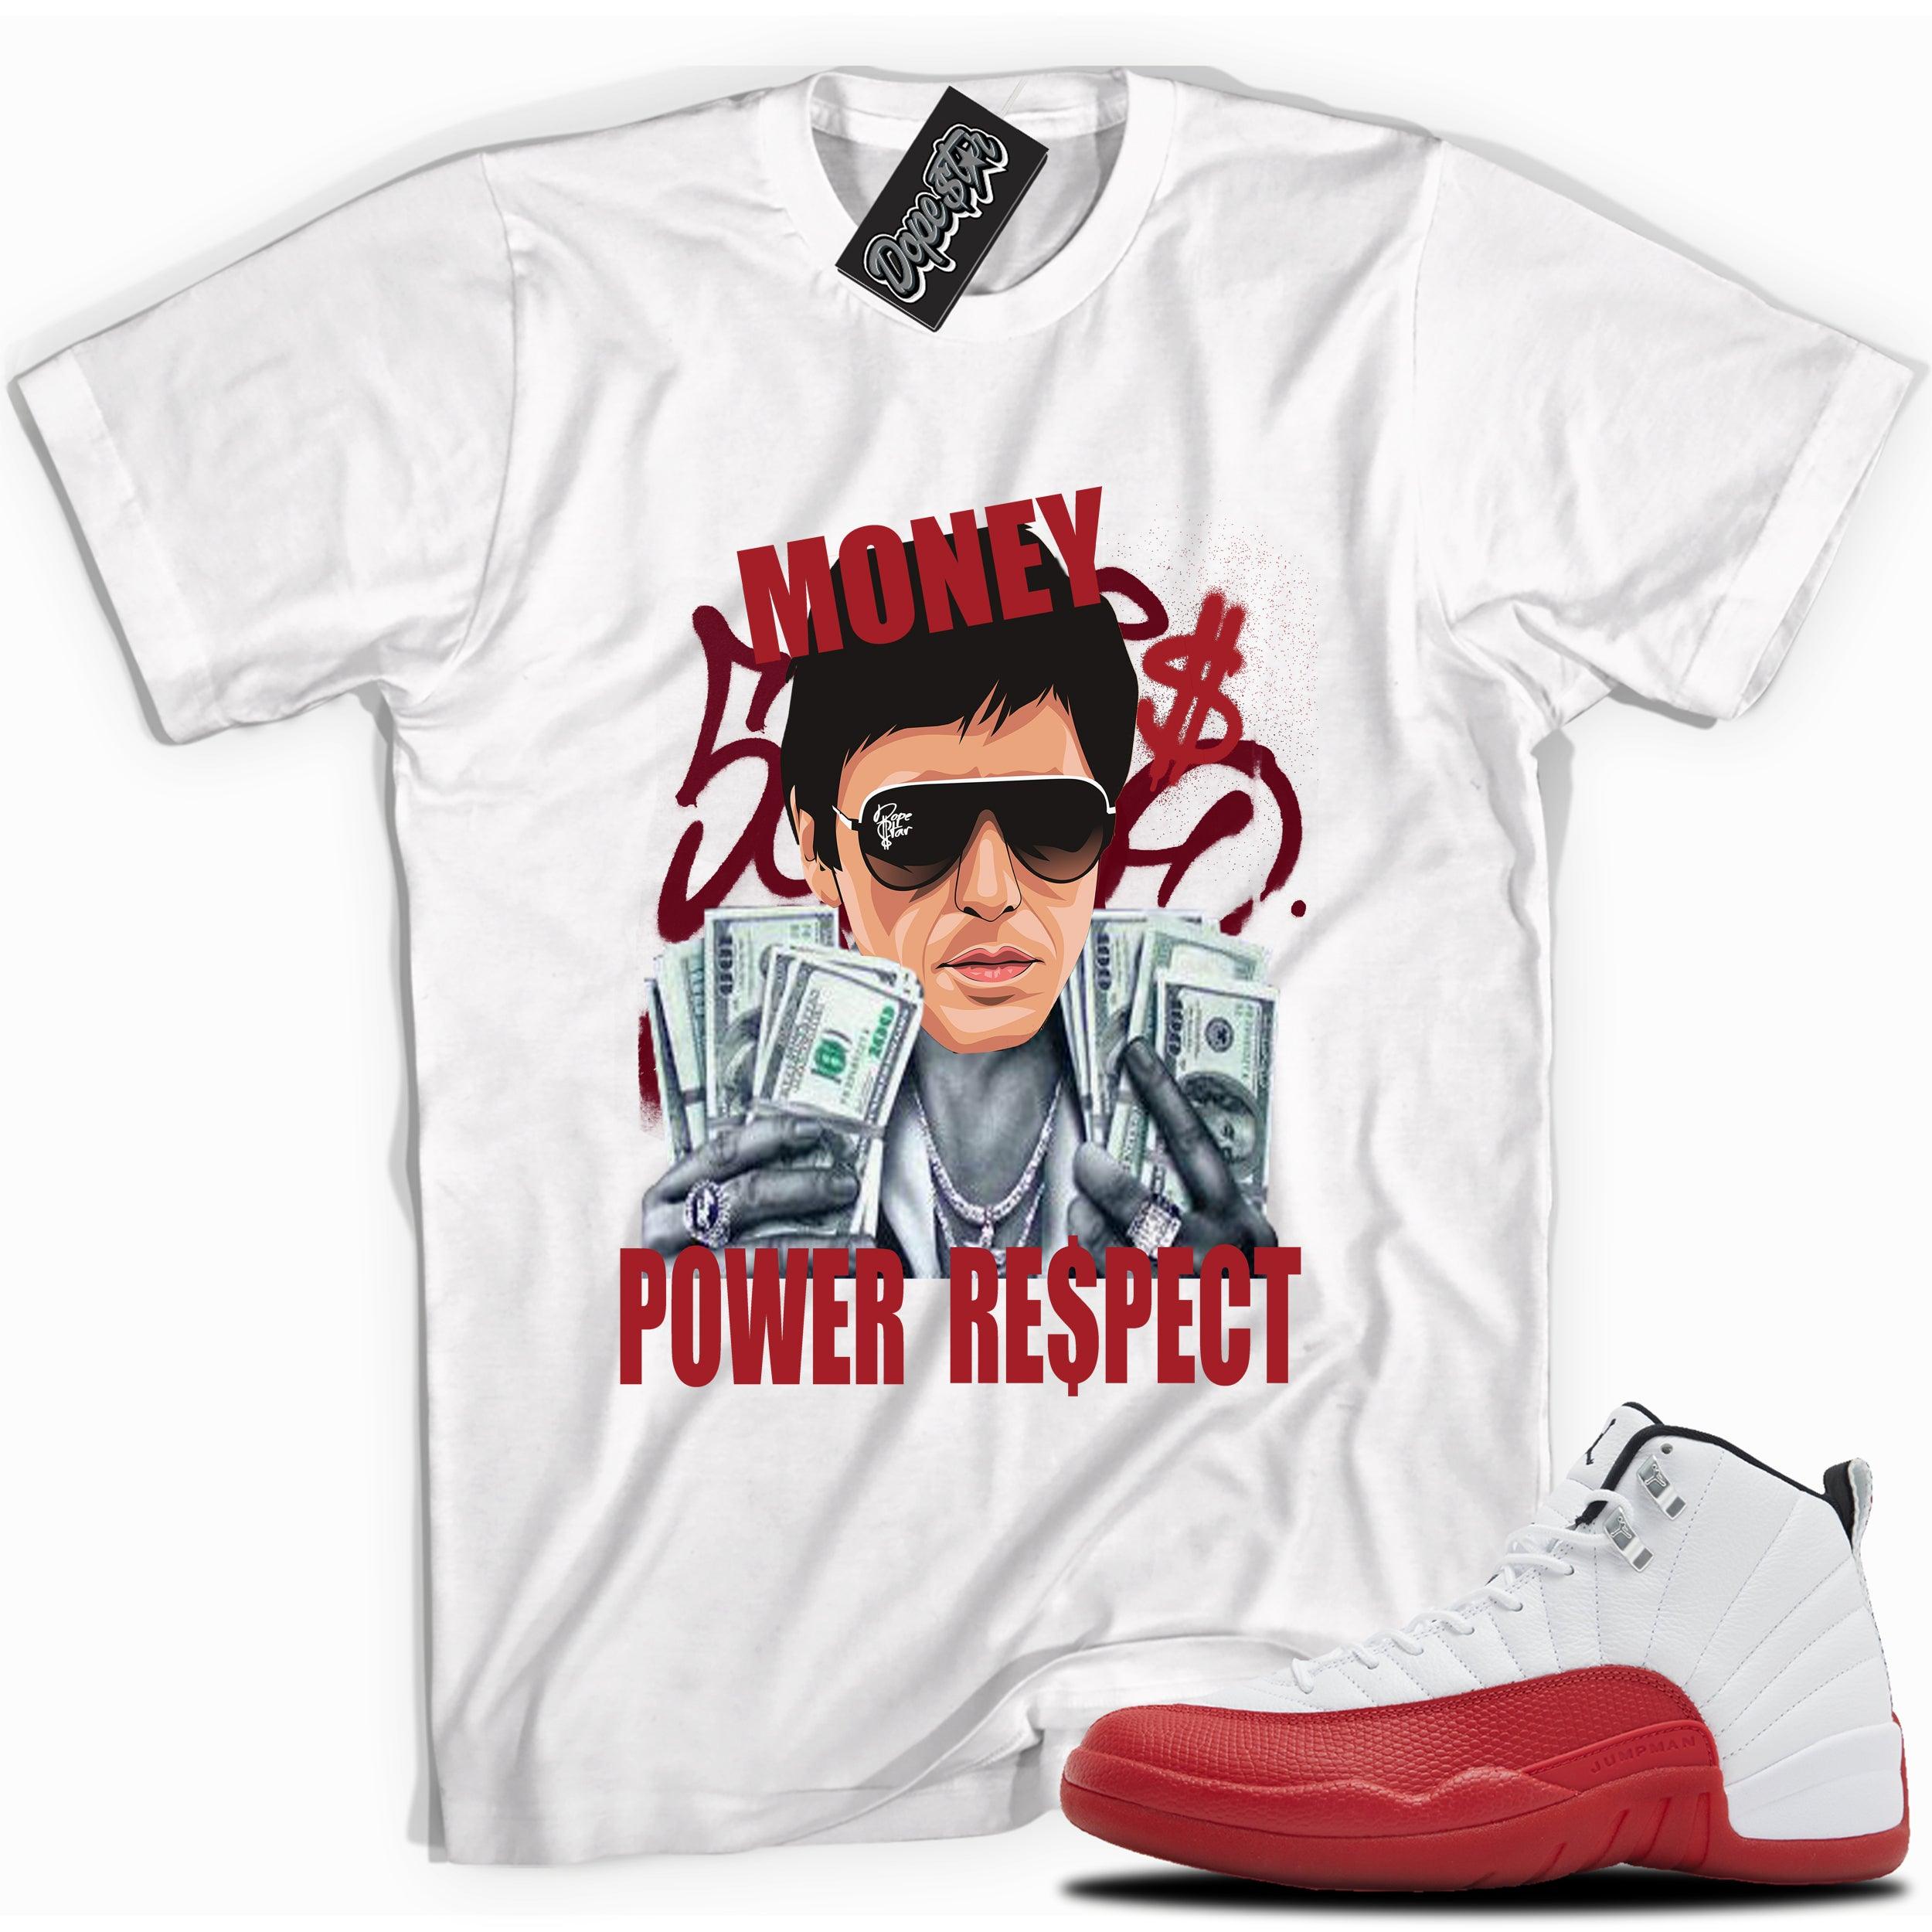 Cool White graphic tee with “Tony Montana” print, that perfectly matches Air Jordan 12 Retro Cherry Red 2023 red and white sneakers 